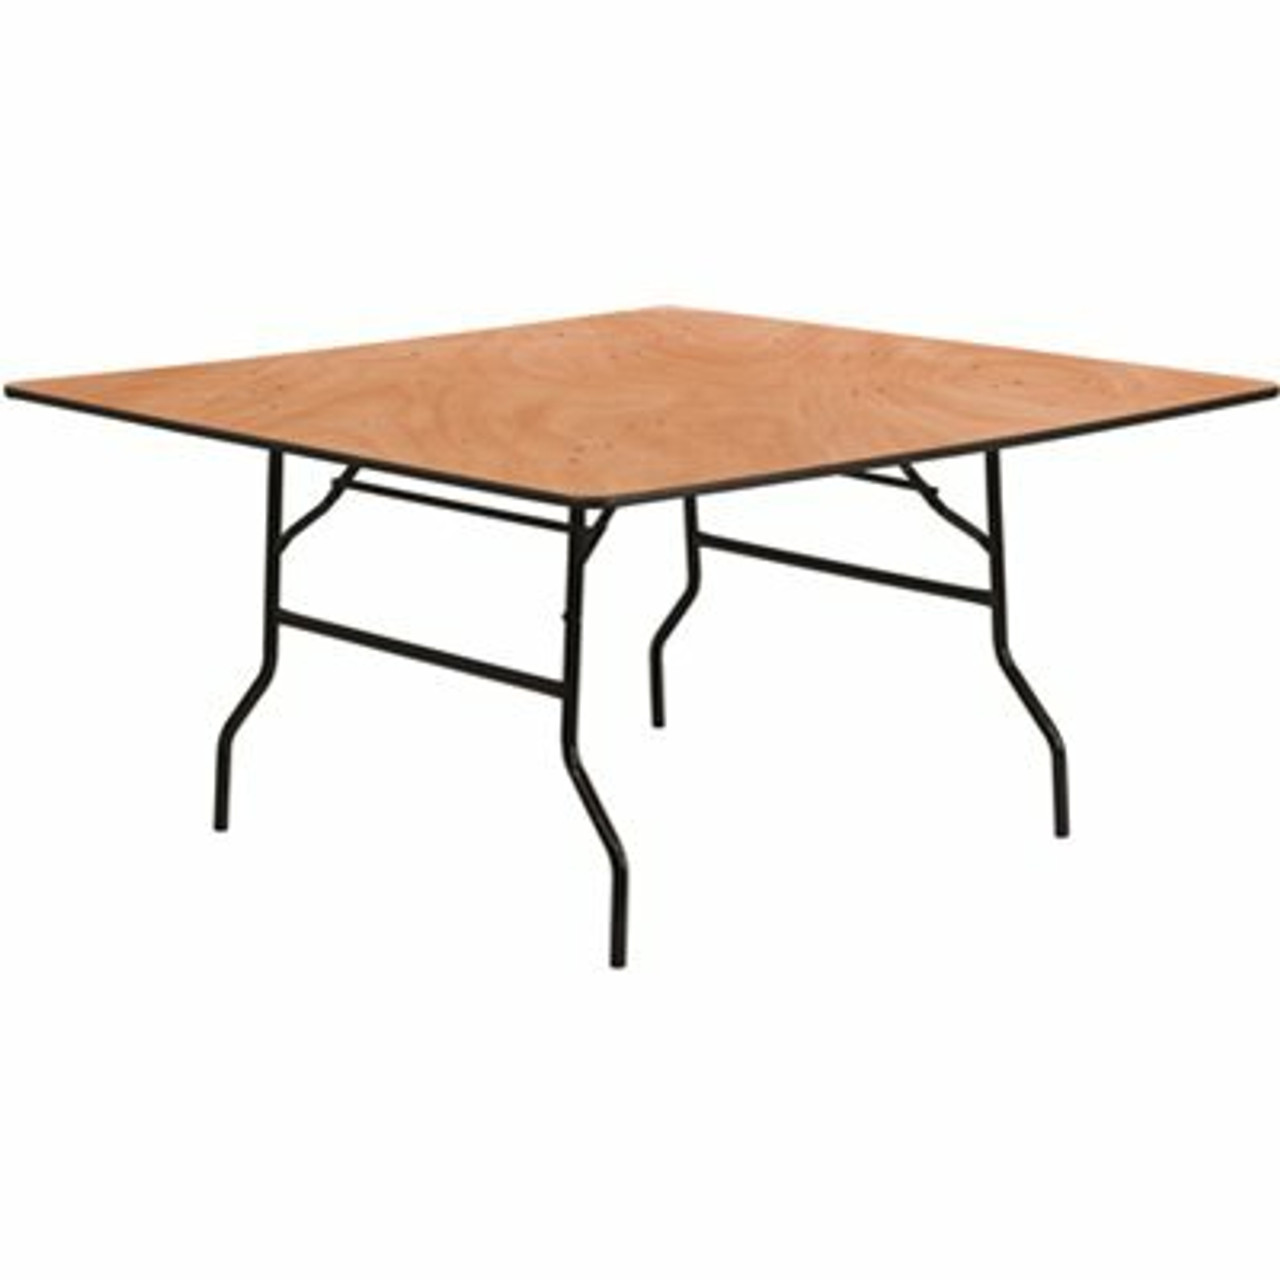 60 In. Natural Wood Tabletop Metal Frame Folding Table - 308688194